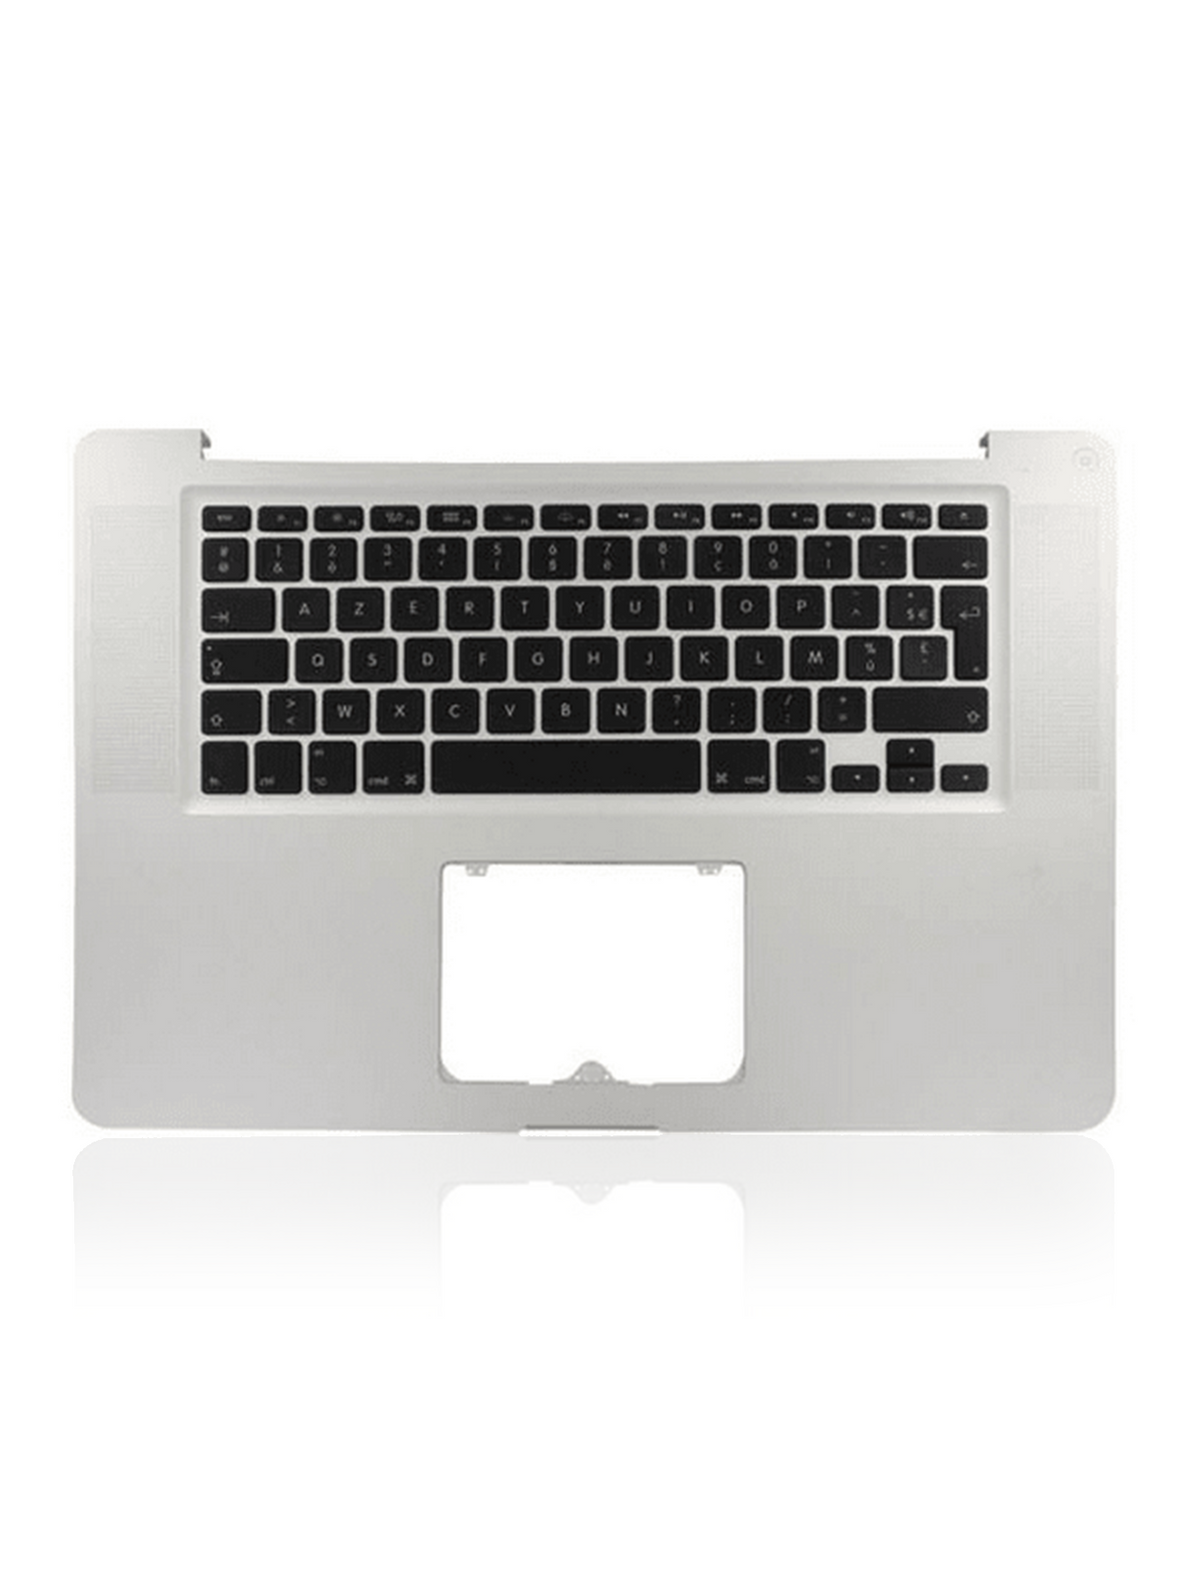 TOP CASE AND KEYBOARD (US ENGLISH) FOR MACBOOK PRO UNIBODY 15" A1286 (LATE 2009)